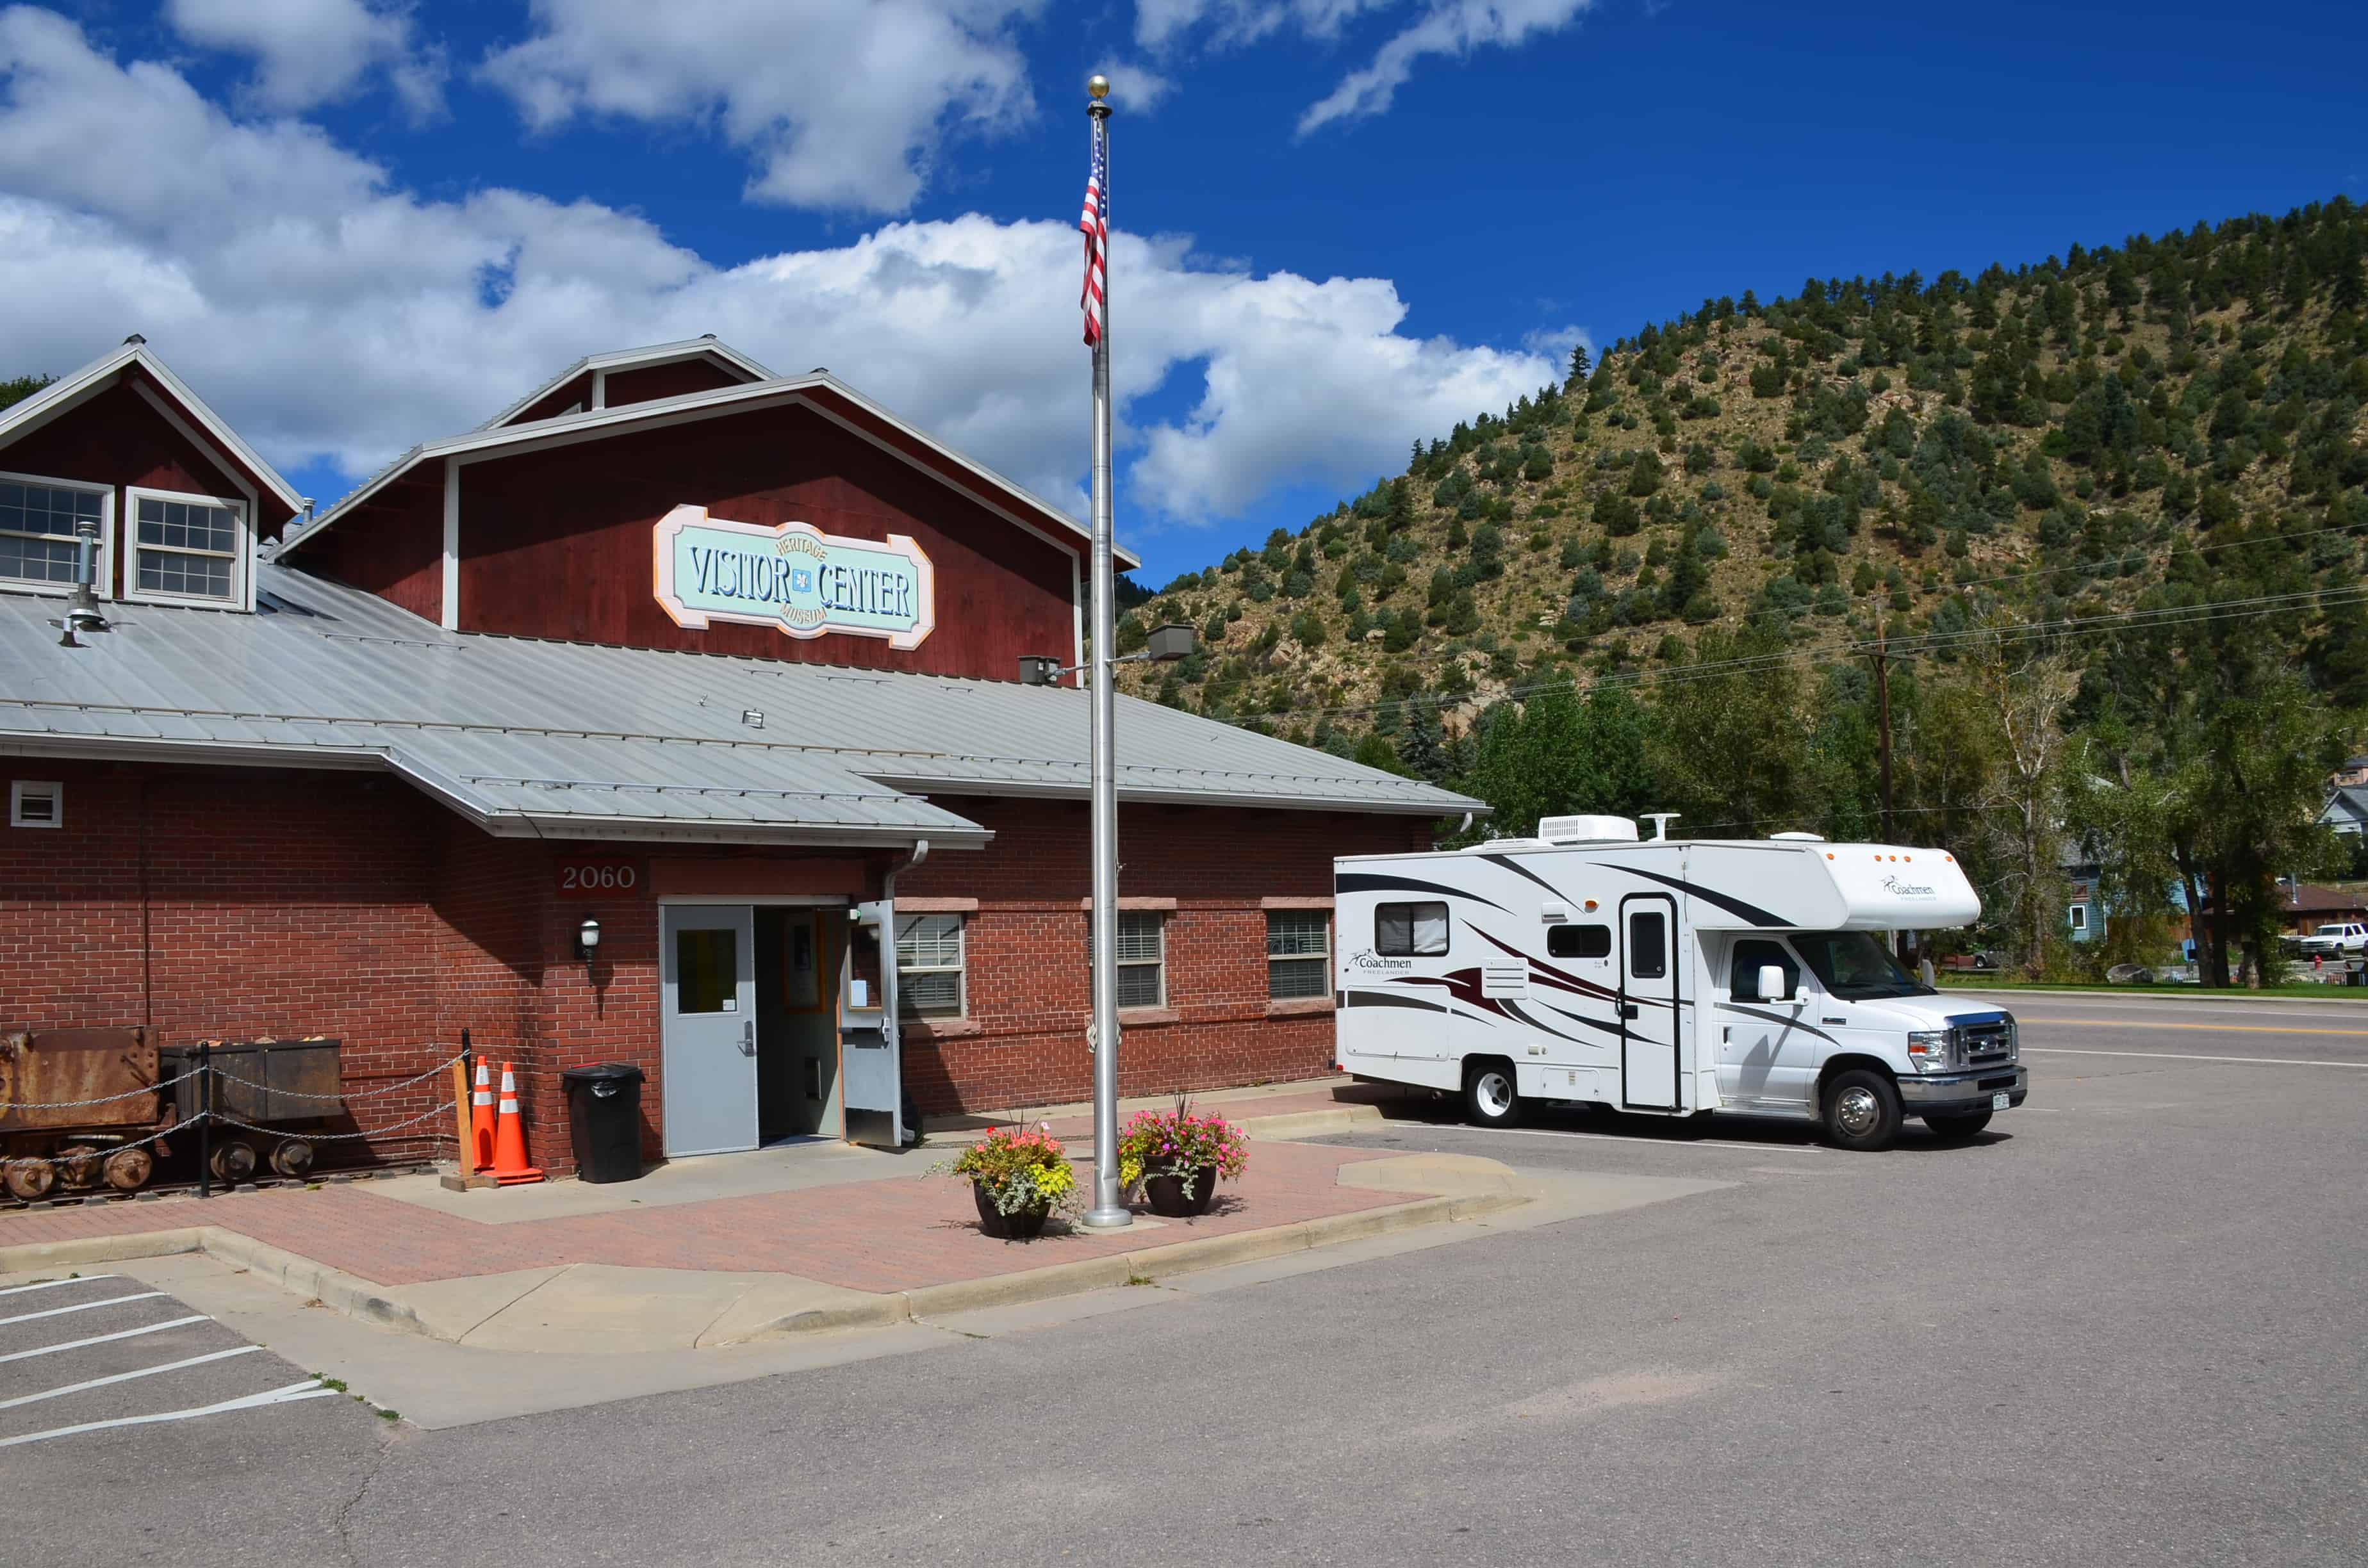 Idaho Springs Visitor Center and Heritage Museum in Colorado